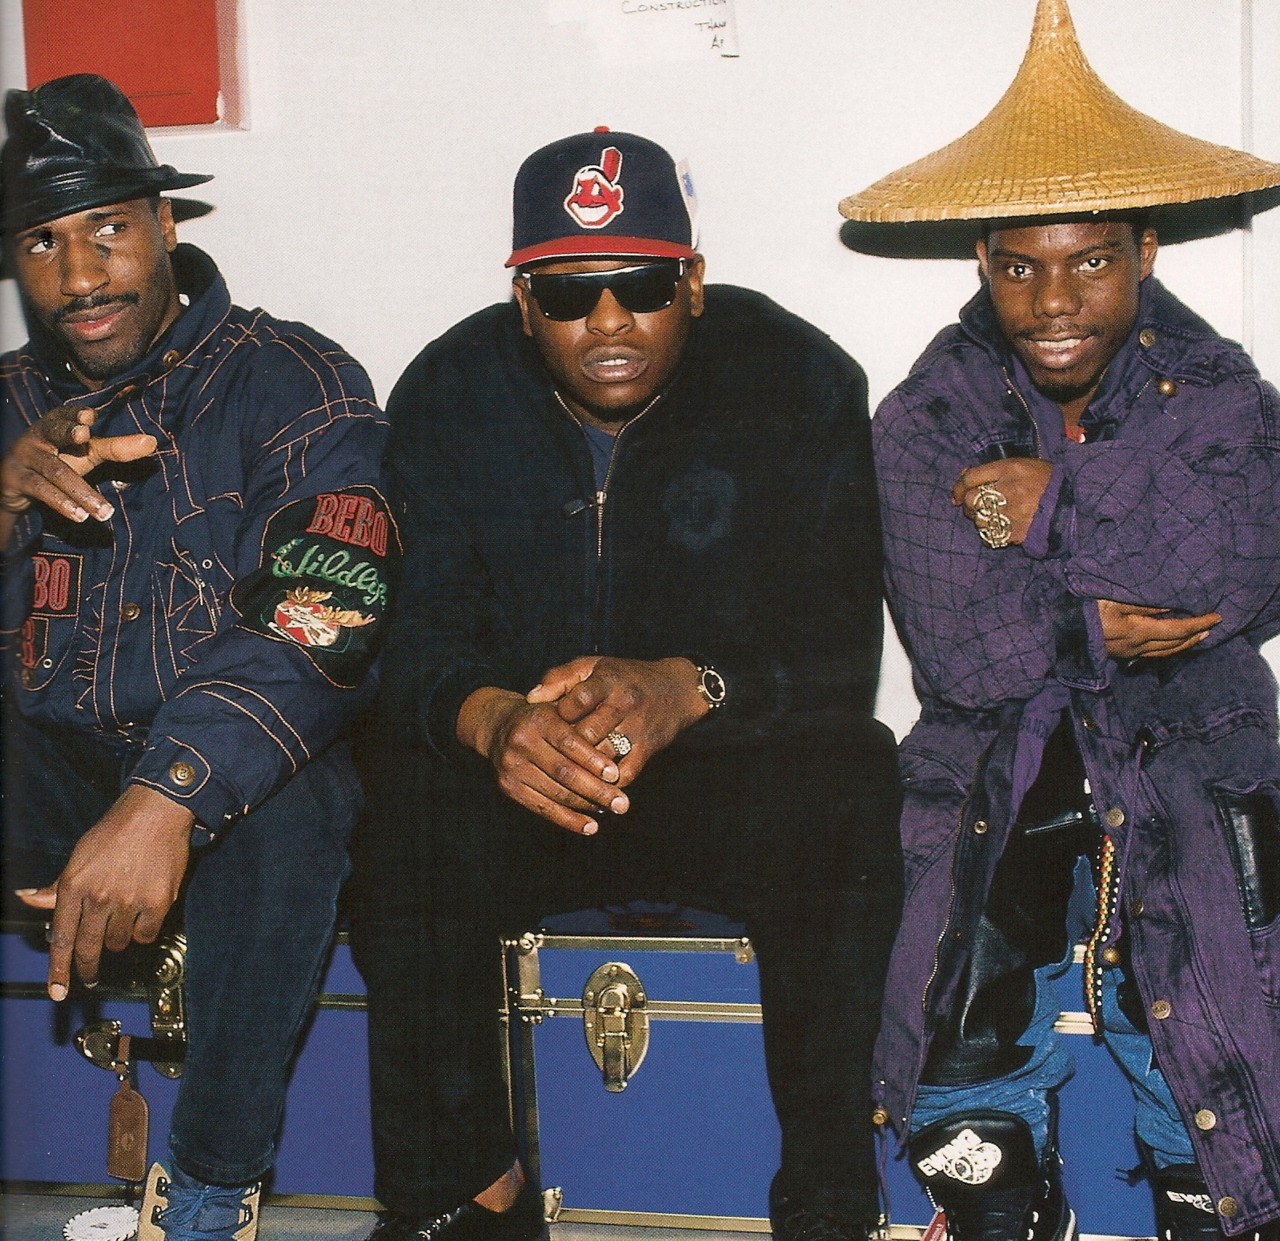 Bushwick Bill says “Step your accessories game up!”